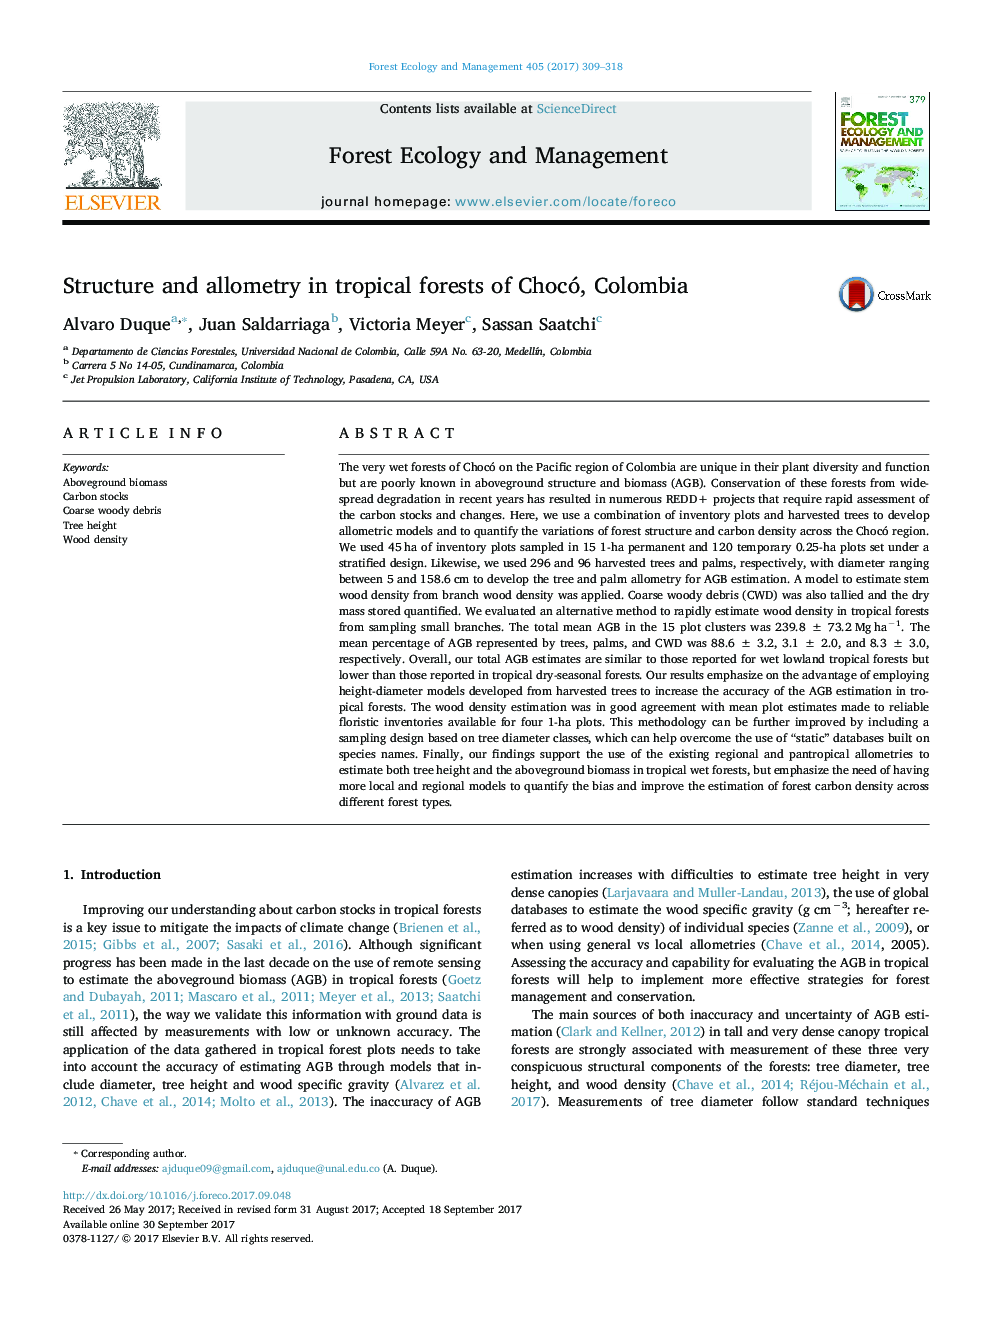 Structure and allometry in tropical forests of Chocó, Colombia